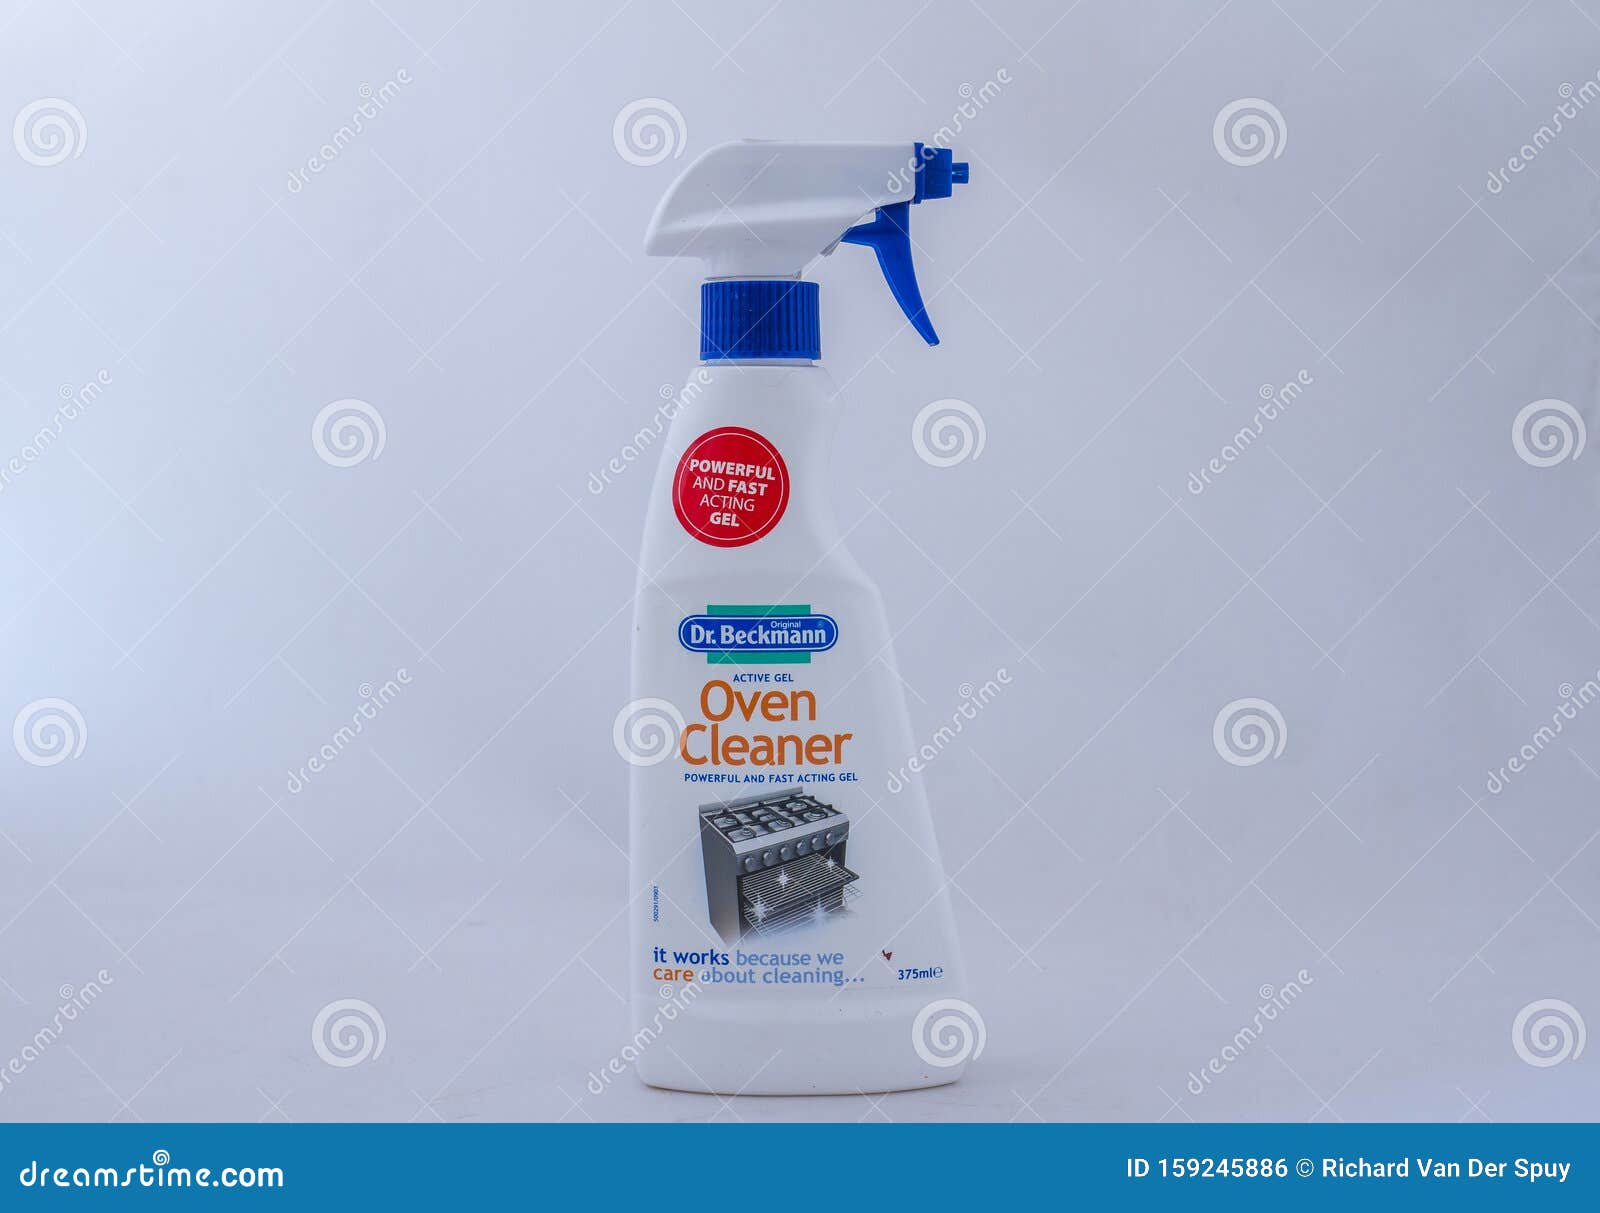 Dr. Beckmann Cleaner Available in South Africa Editorial Photo Image of background, 159245886